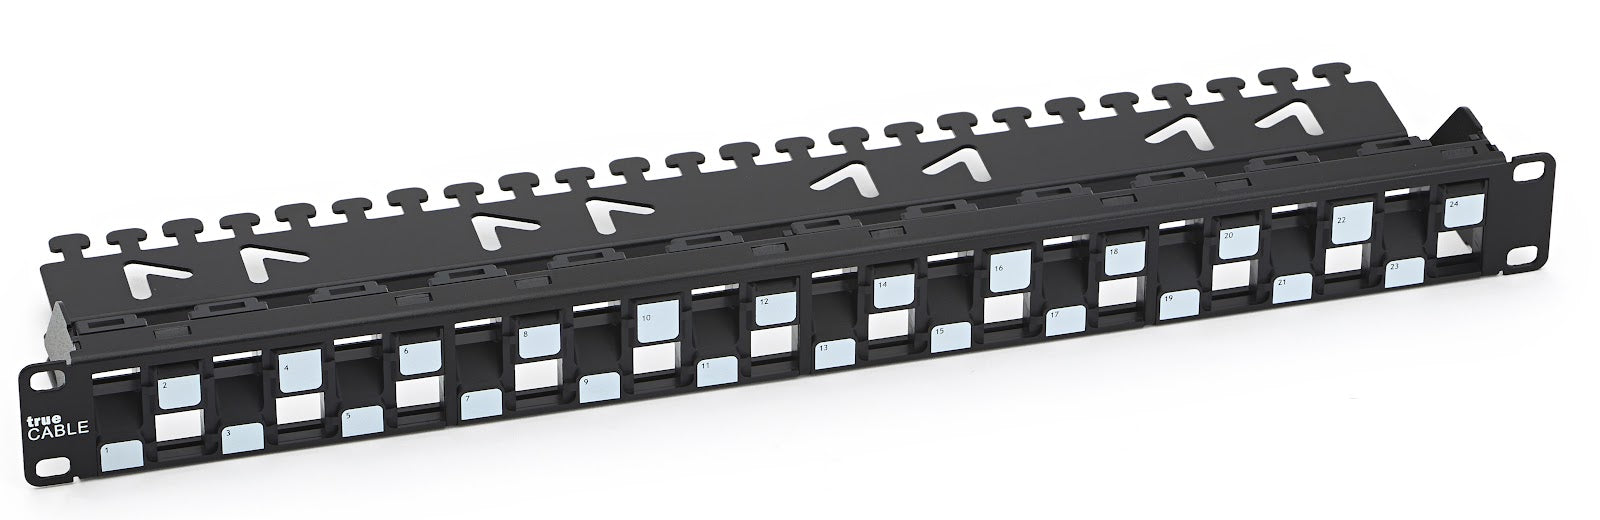 trueCABLE staggered Patch Panel